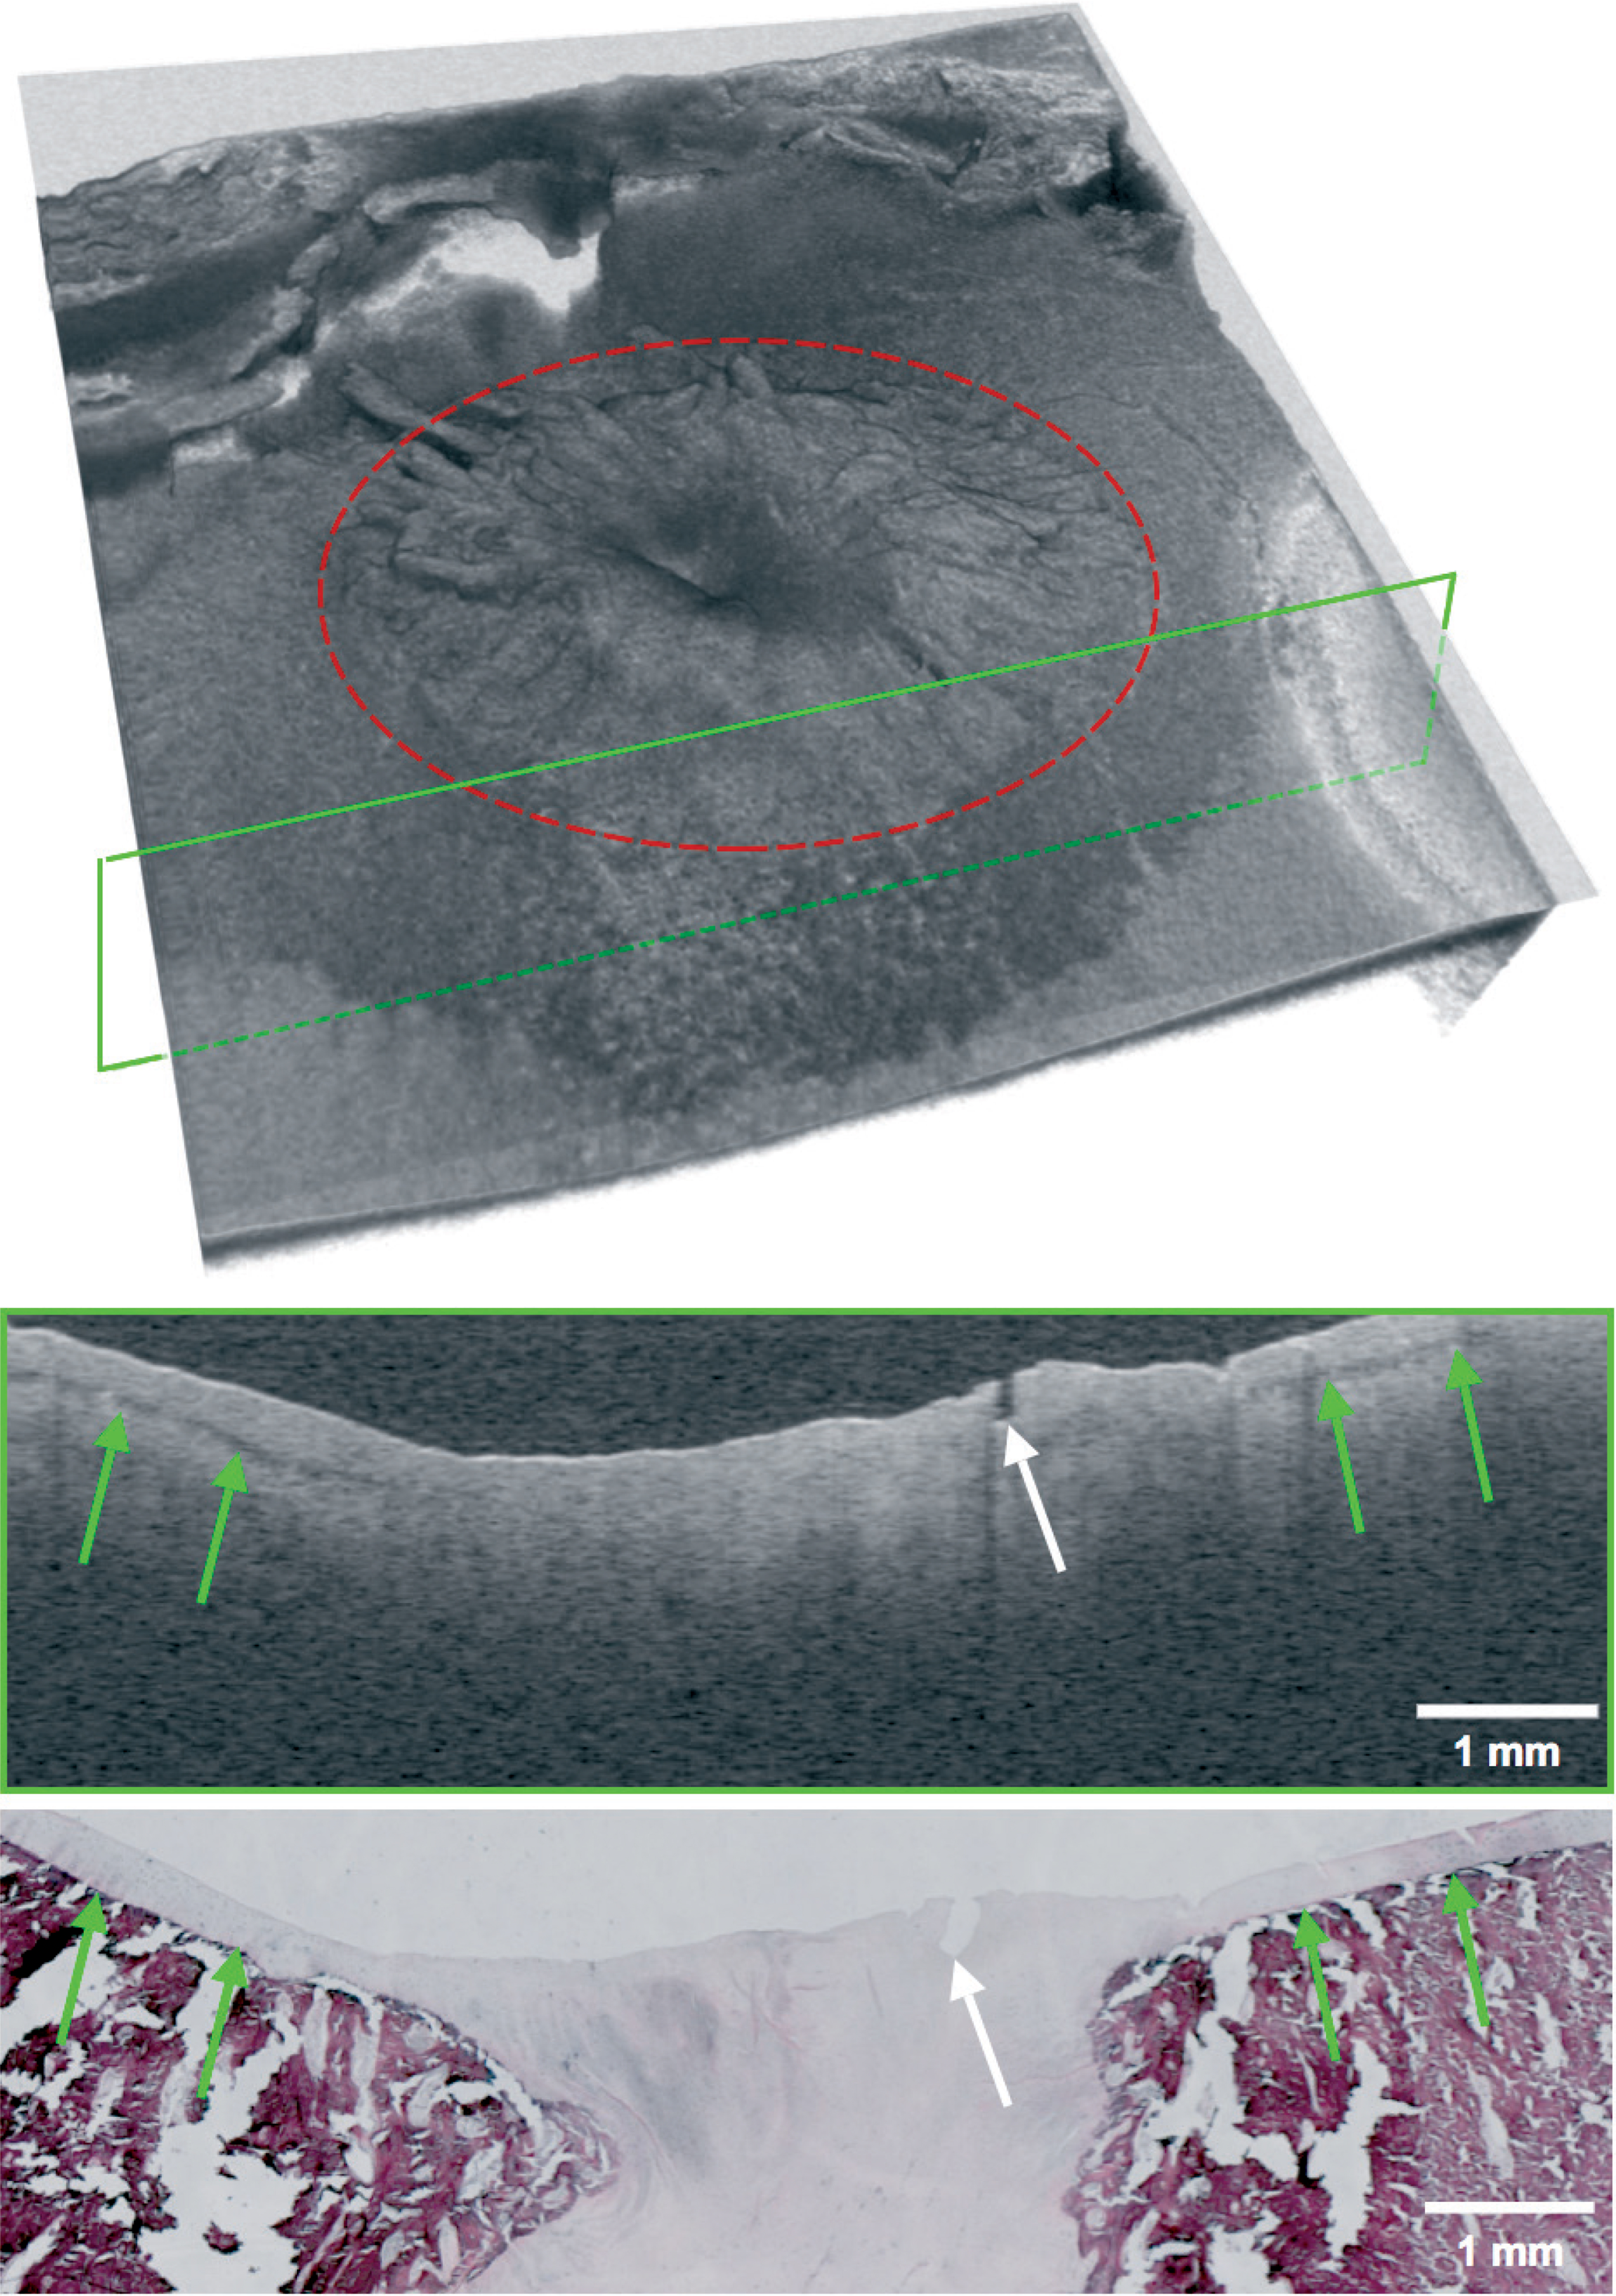 Figure 1. View of a typical OCT dataset consisting of 300 slices with corresponding single OCT slice (top) and matched histopathology slide (bottom). The site of the osteochondral defect is marked in red and the location of the OCT slide is marked with a green frame. Landmark properties such as small fissures (white arrow) and the transitional zone between cartilage and subchondral zone (green arrows) are identified in both modalities.